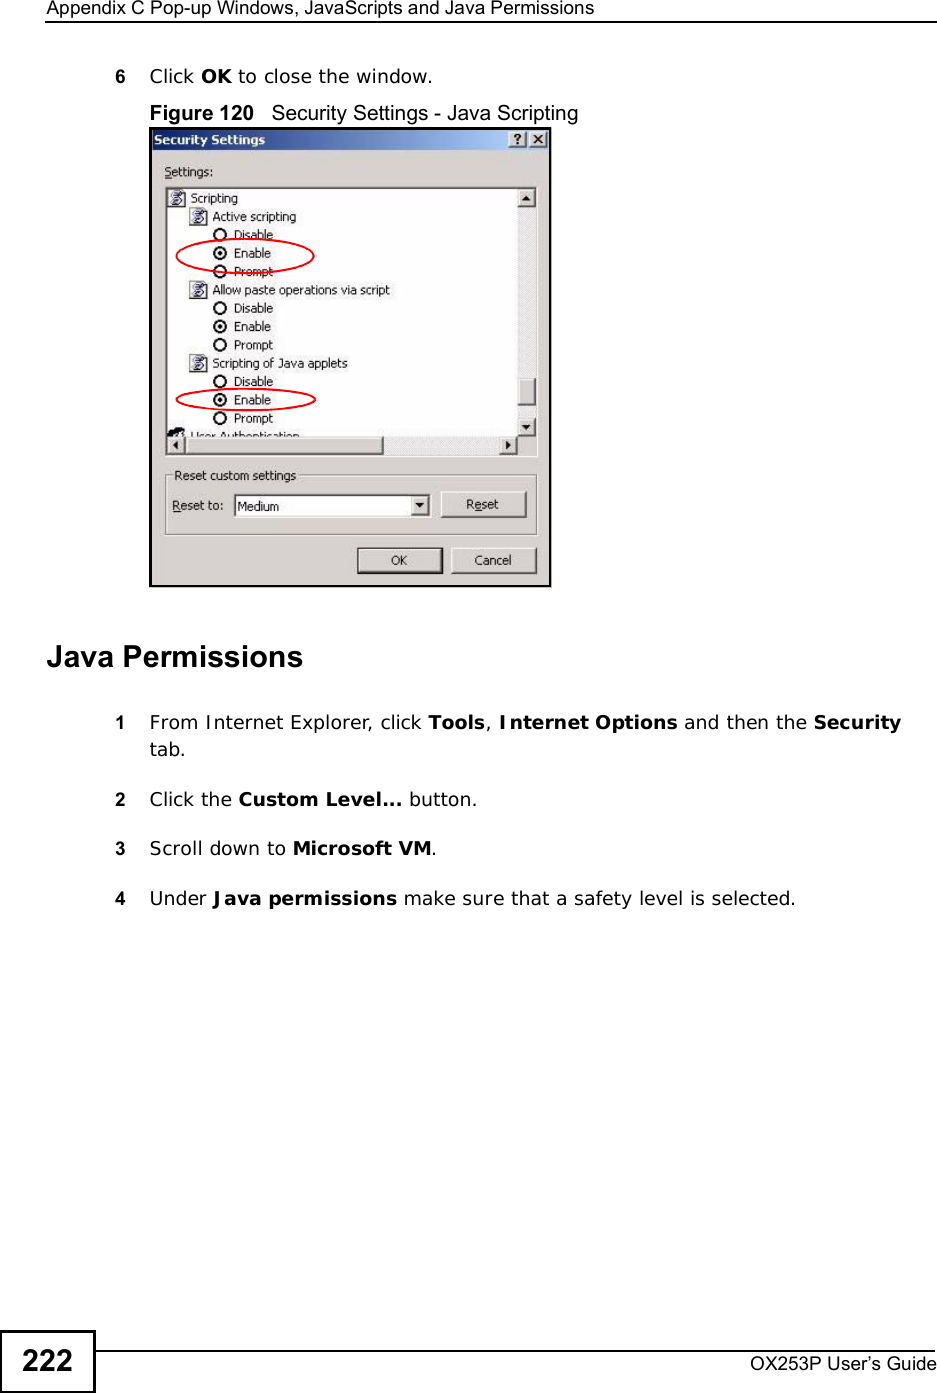 Appendix CPop-up Windows, JavaScripts and Java PermissionsOX253P User’s Guide2226Click OK to close the window.Figure 120   Security Settings - Java ScriptingJava Permissions1From Internet Explorer, click Tools,Internet Options and then the Securitytab. 2Click the Custom Level... button. 3Scroll down to Microsoft VM.4Under Java permissions make sure that a safety level is selected.